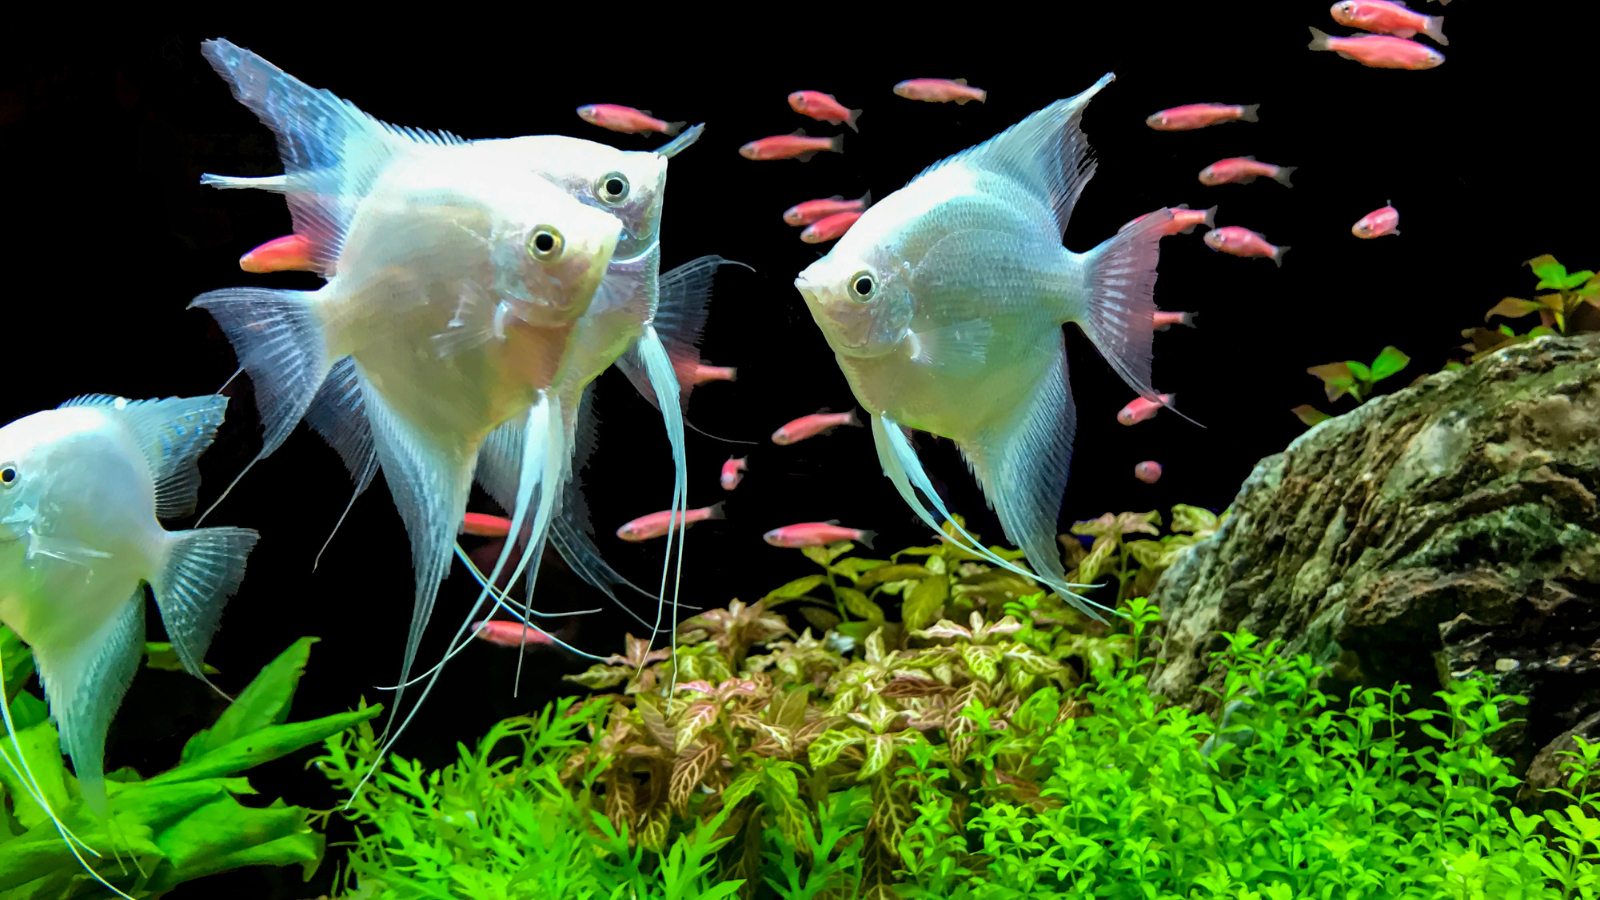 Angel fish are by far the most iconic freshwater aquarium fish. They are simply gorgeous.